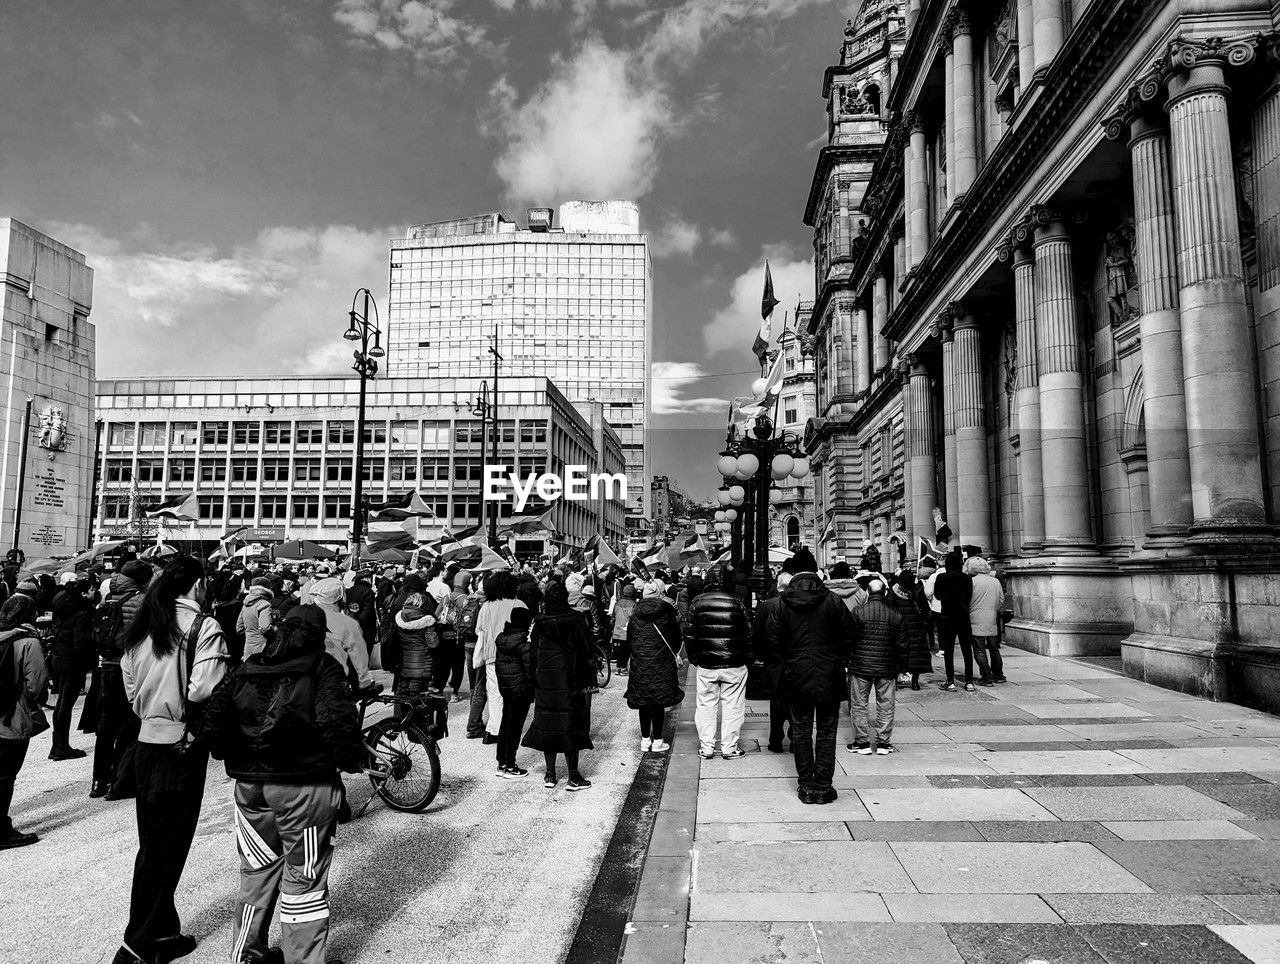 architecture, street, road, city, building exterior, built structure, black and white, urban area, group of people, crowd, infrastructure, monochrome, large group of people, monochrome photography, city life, sky, walking, adult, men, women, city street, building, cityscape, metropolis, lifestyles, day, nature, travel destinations, outdoors, person, transportation, cloud, black, travel, downtown